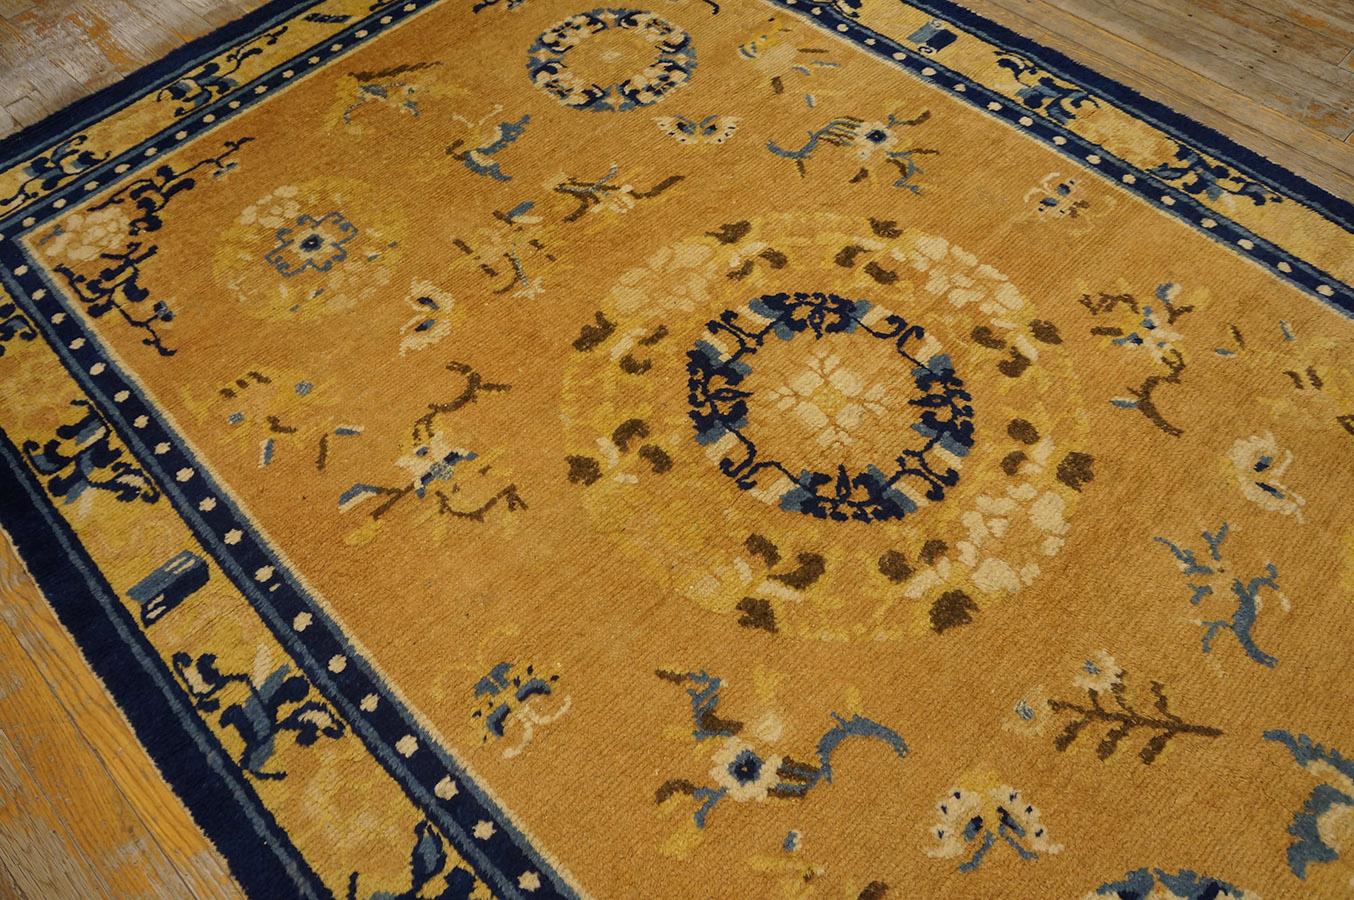 Late 18th Century Chinese Ningxia Carpet ( 5' x 8' 1'' - 152 x 246 cm ) For Sale 1